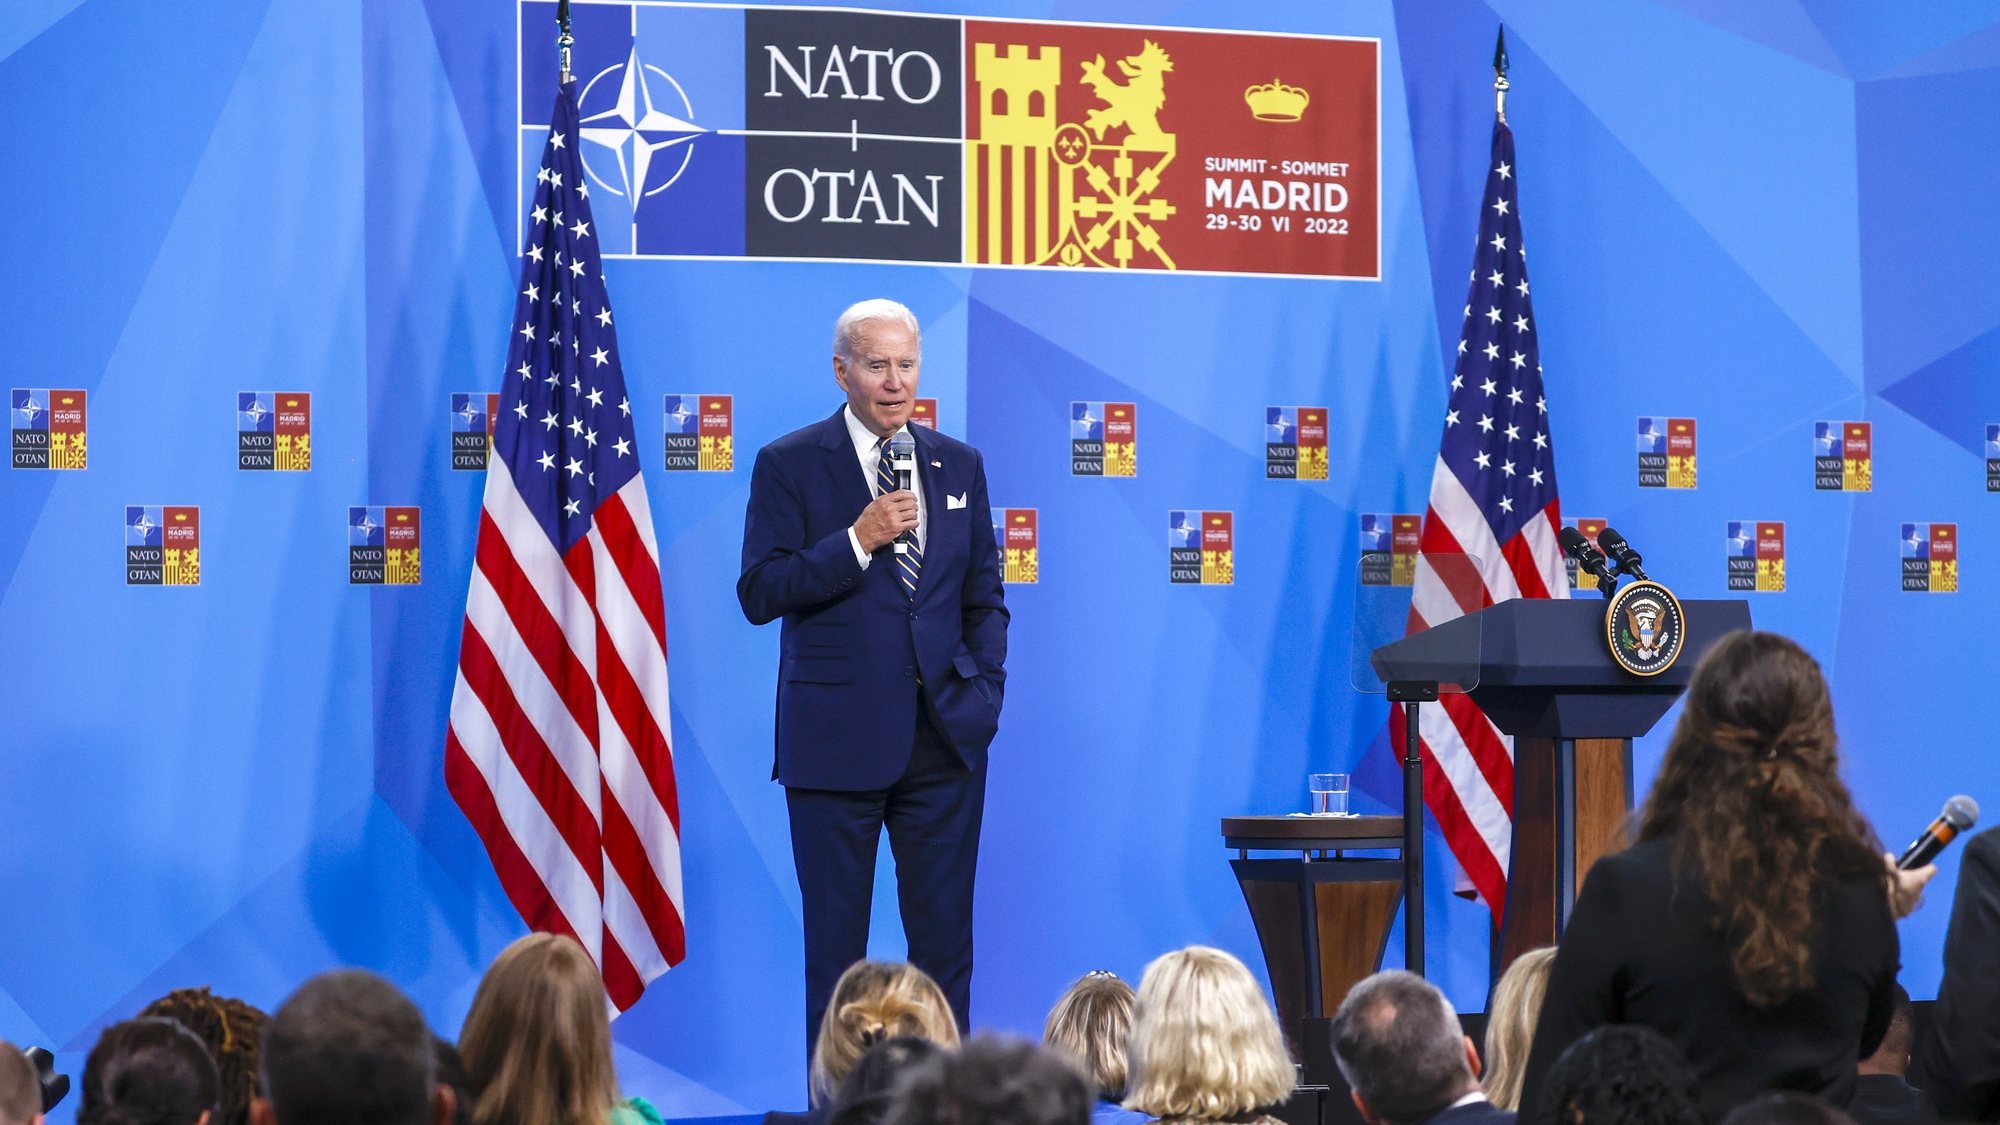 epa10043602 US President Joe Biden addresses a press conference on the last day of the NATO Summit at the IFEMA Convention Center, in Madrid, Spain, 30 June 2022. Heads of State and Government from NATO&#039;s member countries and key partners were gathering in Madrid to discuss important issues facing the Alliance and endorse NATO&#039;s new Strategic Concept, the Organization said. Spain hosted the 2022 NATO Summit coinciding with the 40th anniversary of its accession to the North Atlantic Treaty Organization (NATO).  EPA/JUAN CARLOS HIDALGO